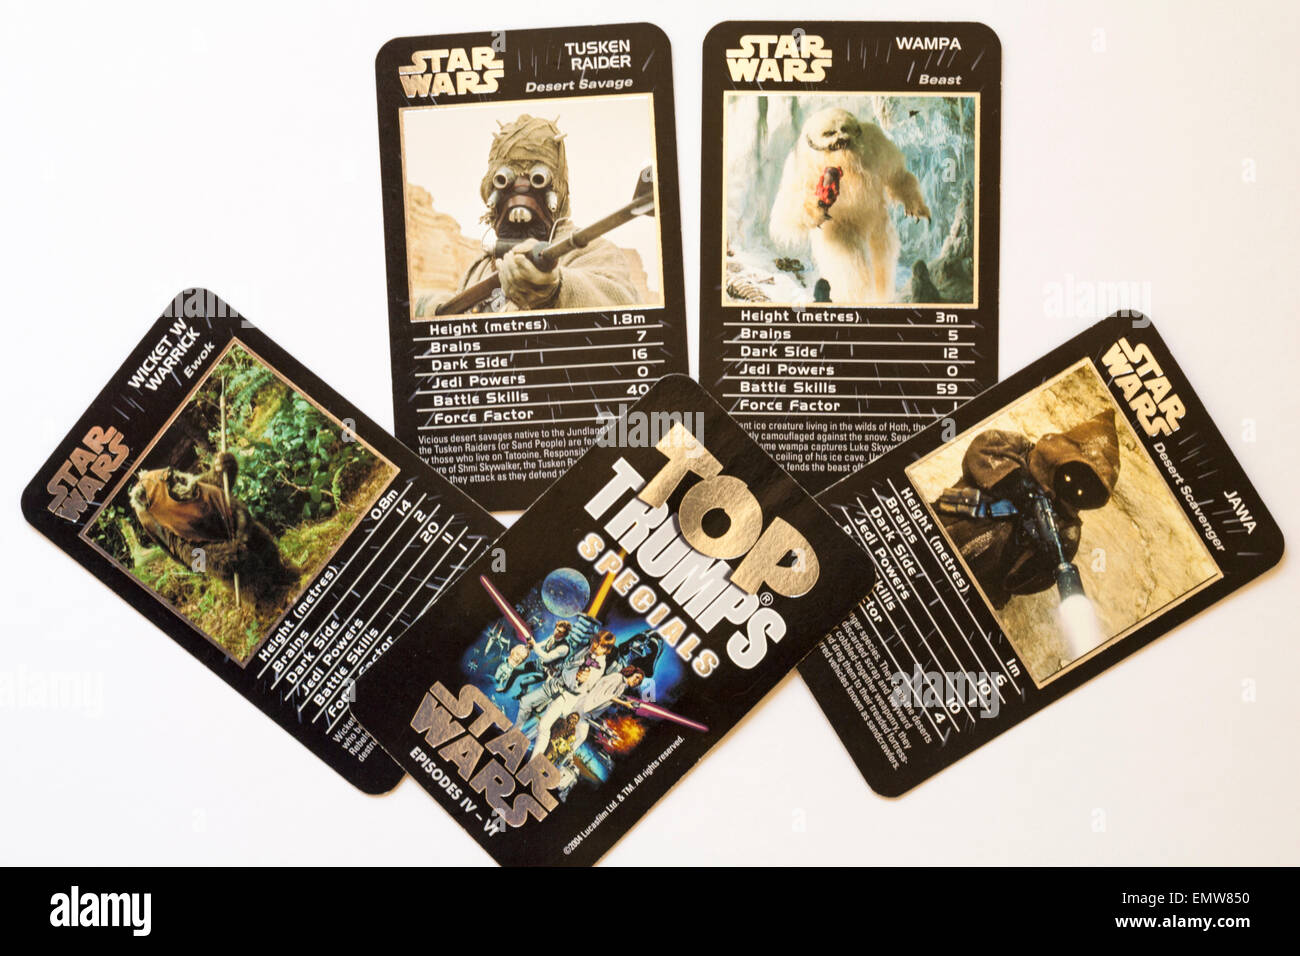 Top Trumps Specials cards Star Wars set on white background Stock Photo